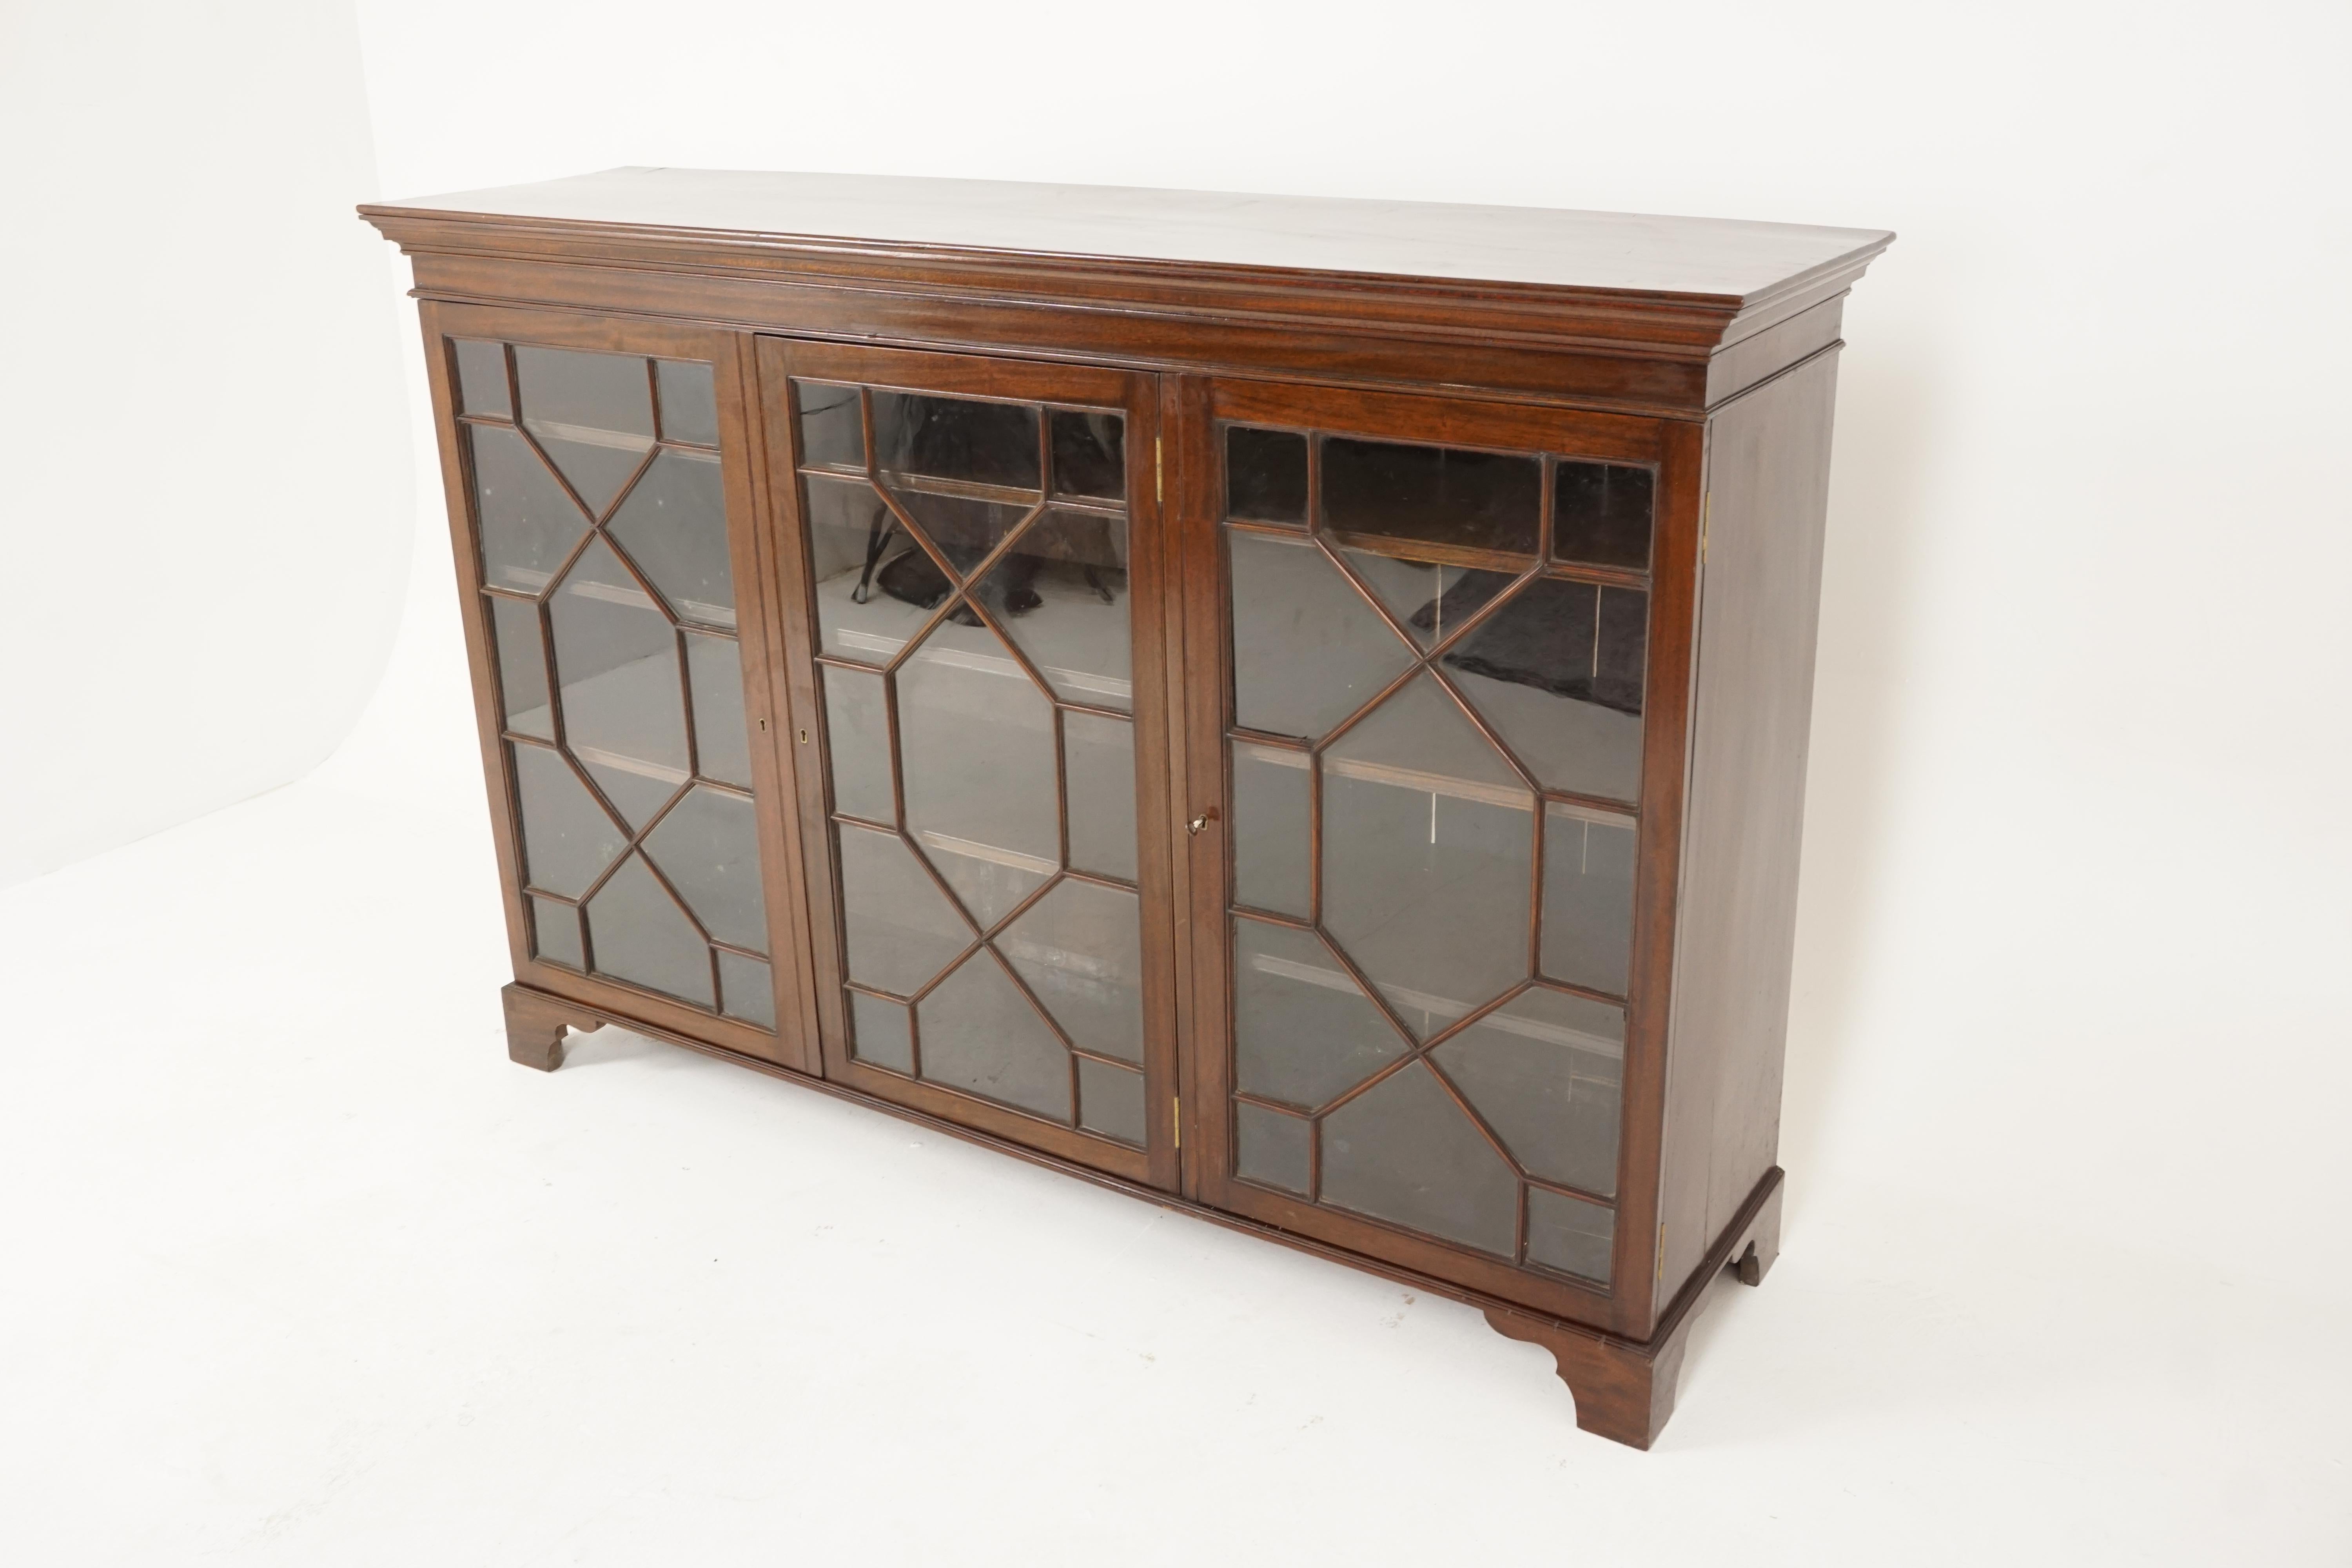 Antique Walnut three door bookcase display cabinet, Scotland 1920, B2409

Scotland, 1920
Solid Walnut
Original finish
Rectangular moulded top
Three glass doors with geometric moulding to the front
Opens to reveal double door to the left and single